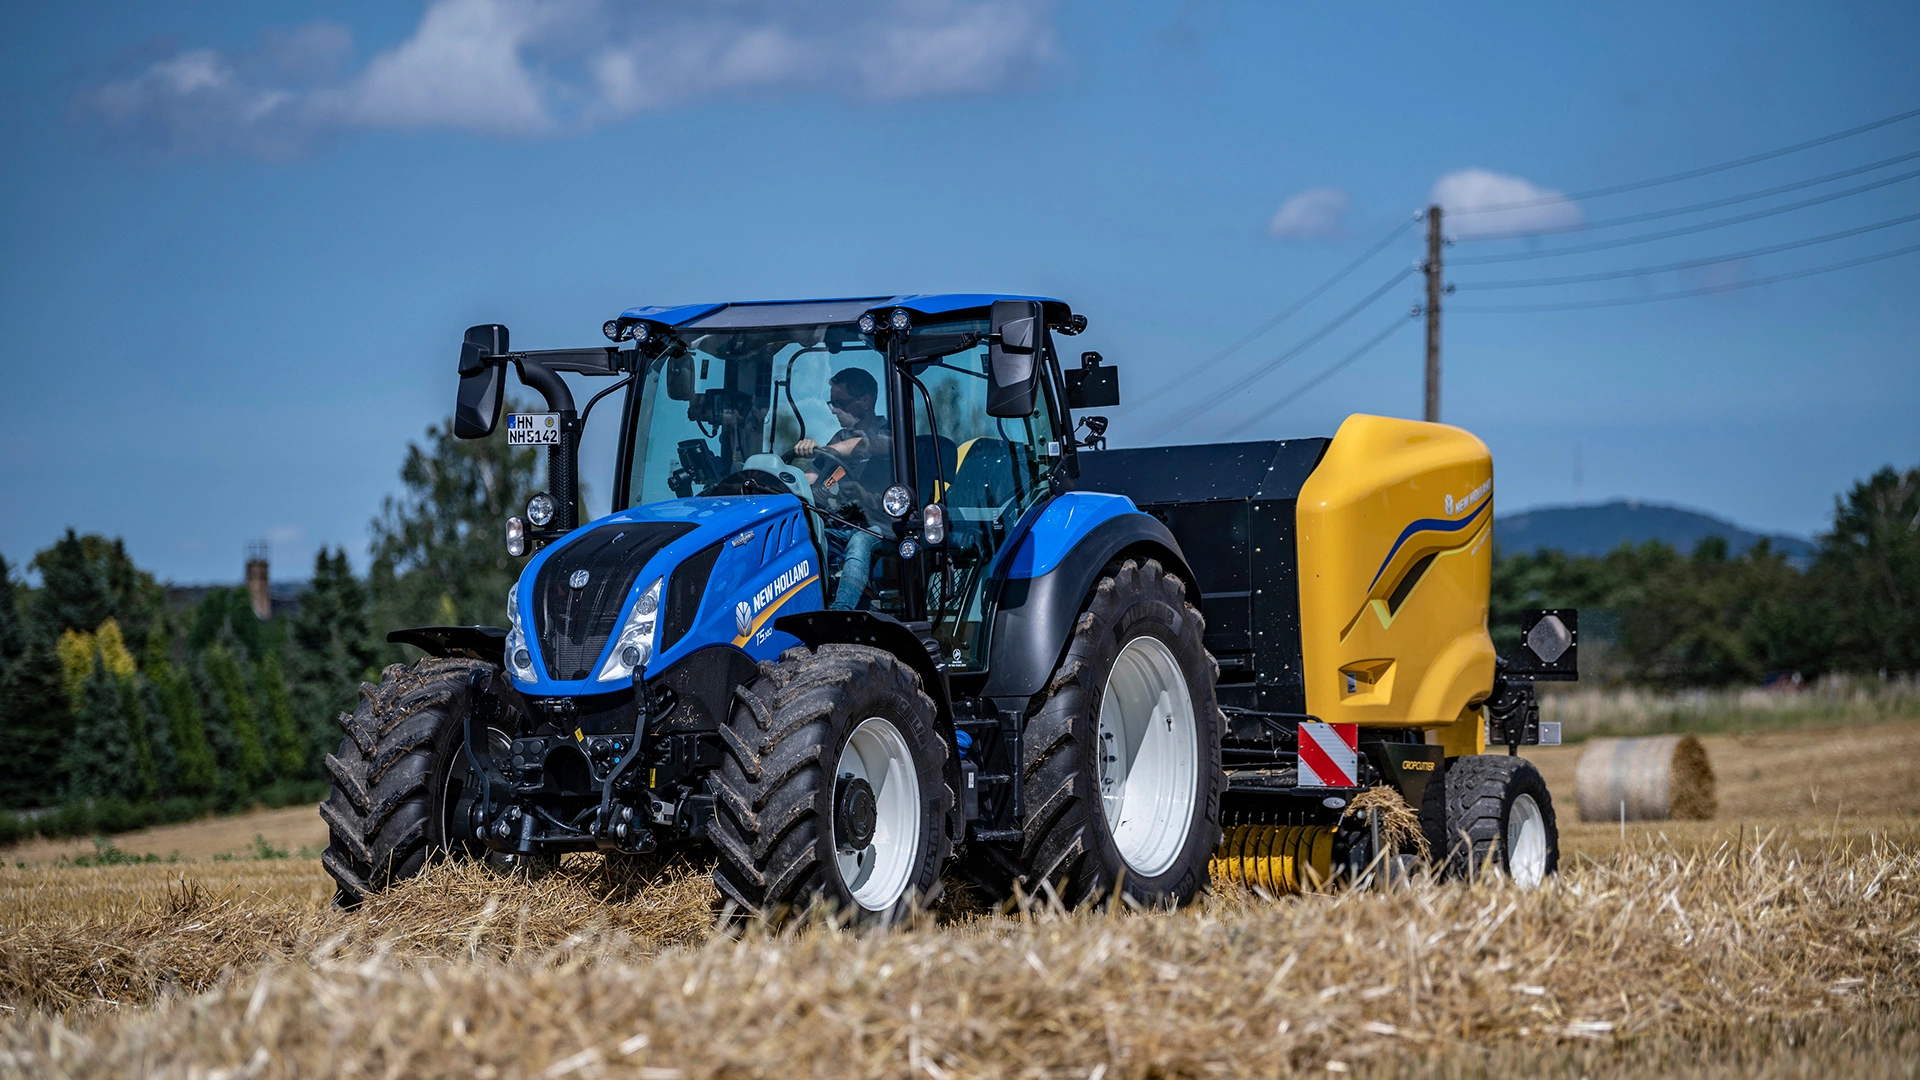 New Holland Tractor working with Roll Bar 125 round baler